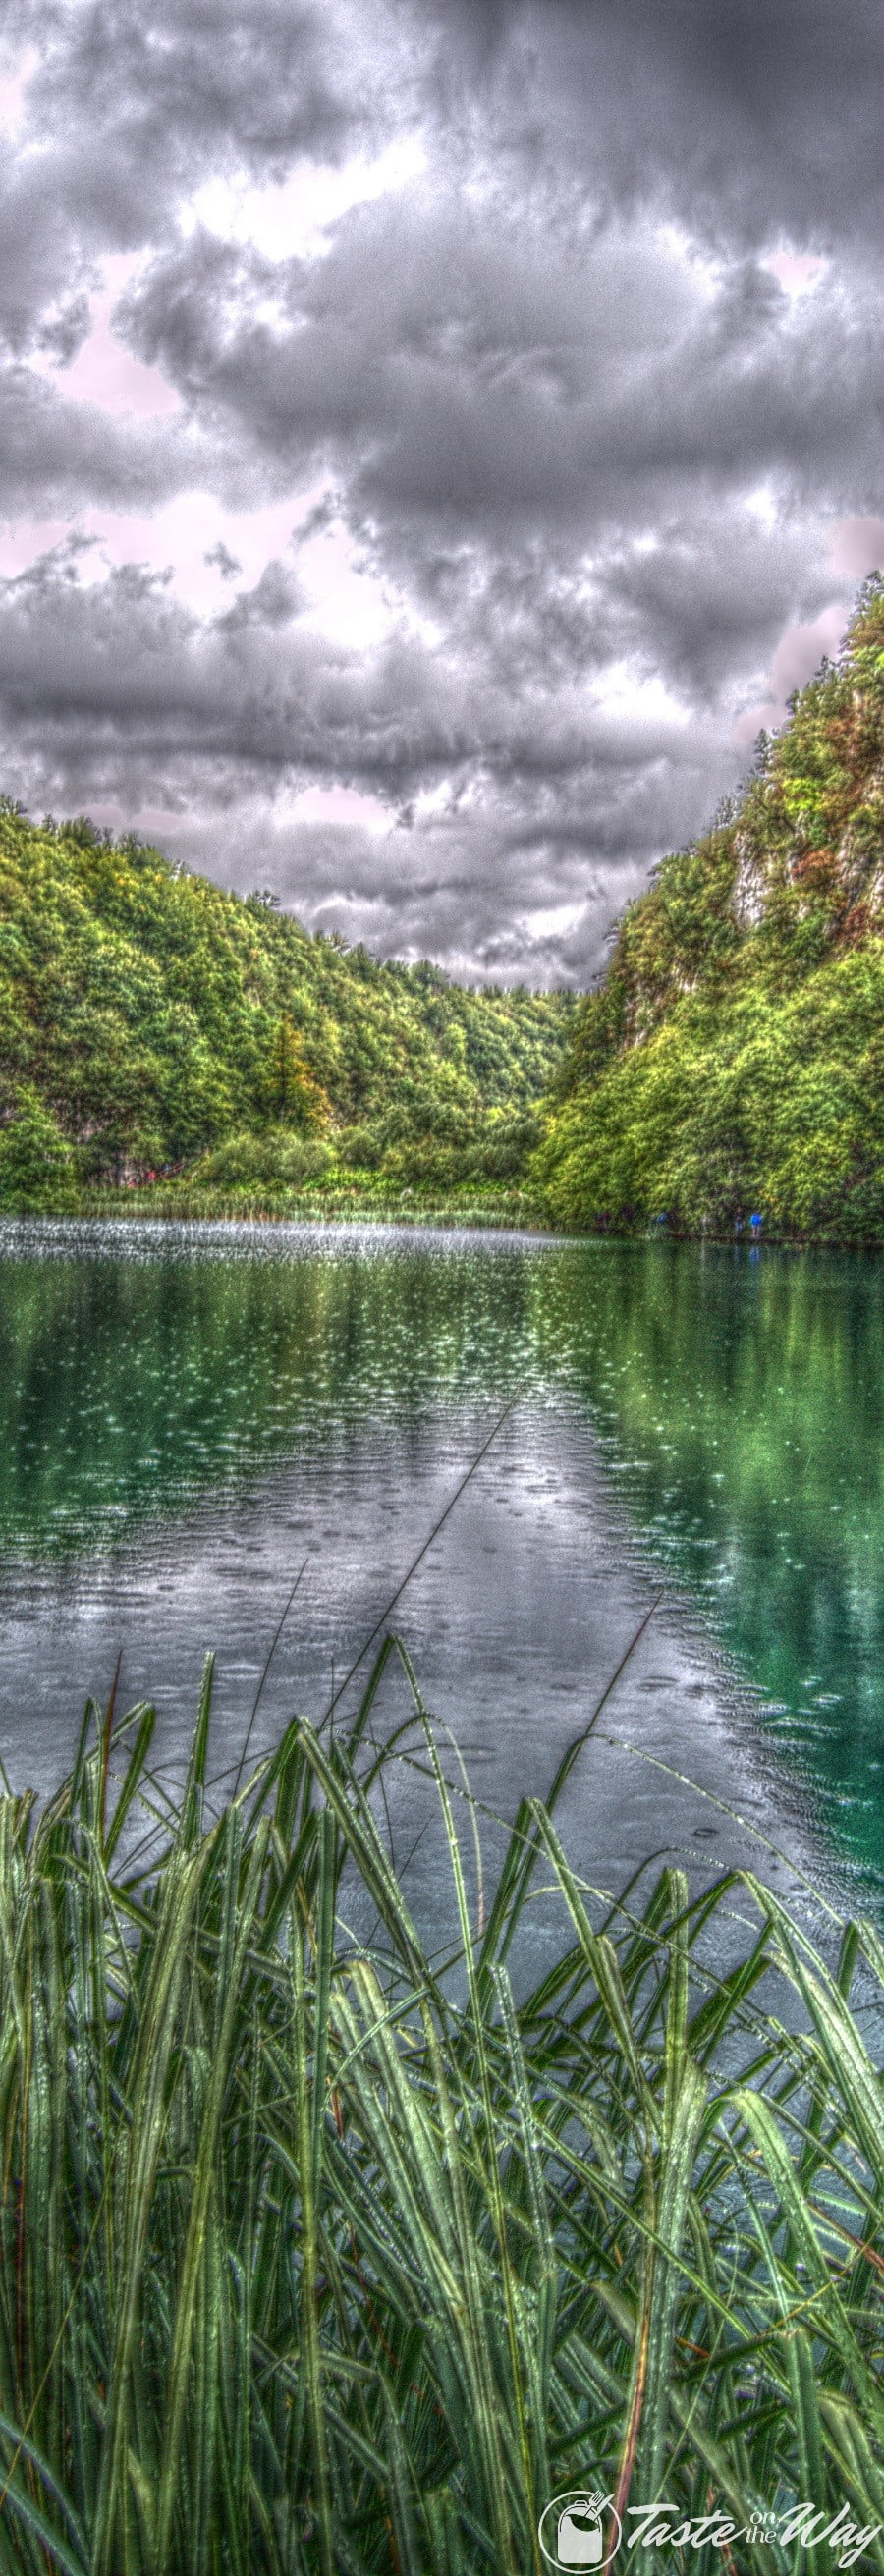 Check out these amazing pictures of Plitvice lakes in #Croatia - it's captivating! #travel #photography #hdr @tasteontheway